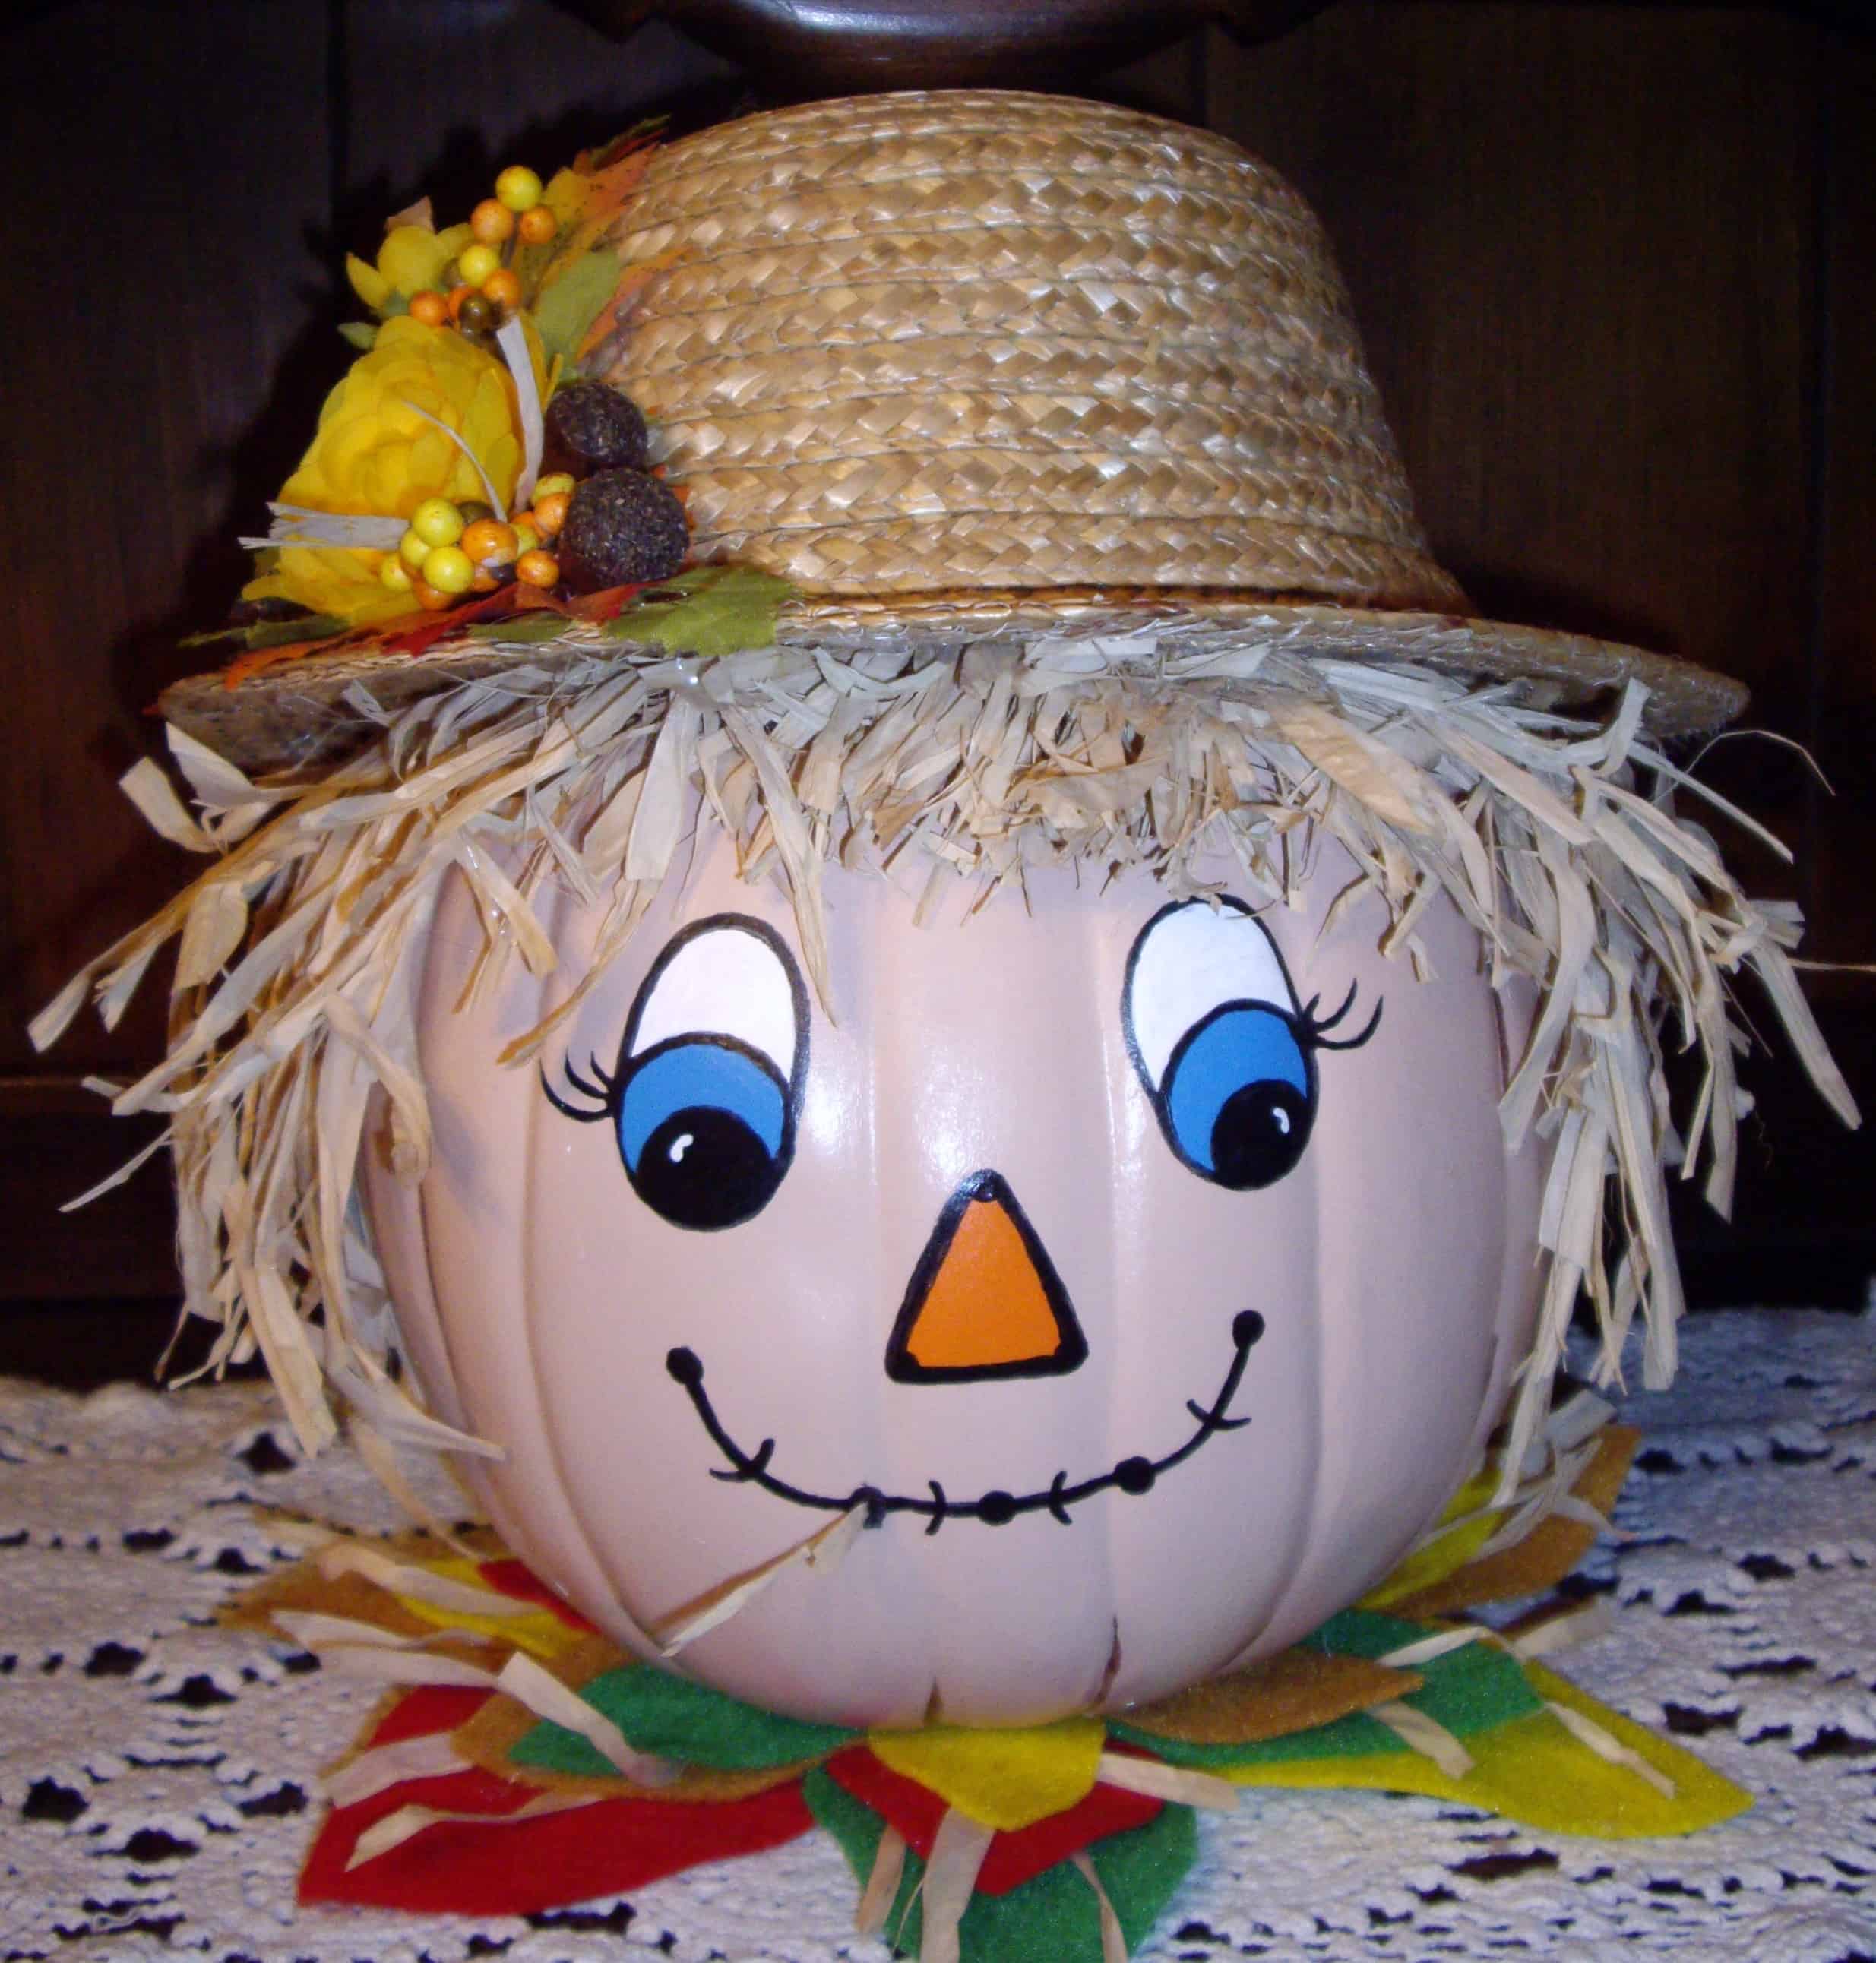 Pumpkin Painting Idea - Turn It Into a Scarecrow